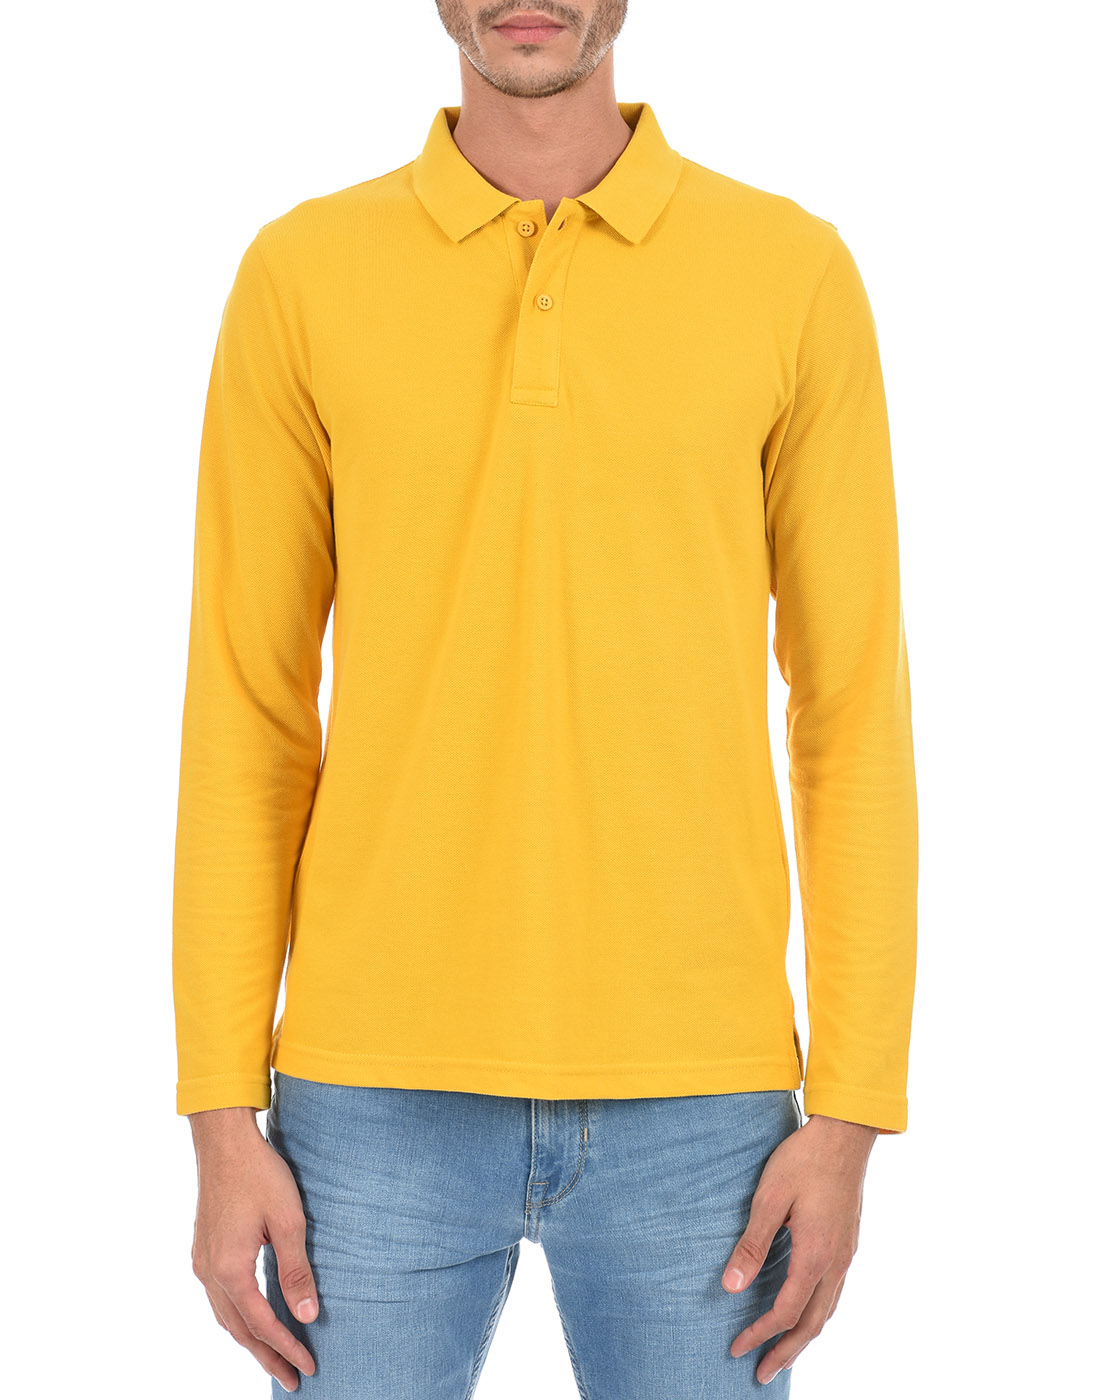 Oneway Men Solid Yellow Polo T-Shirt